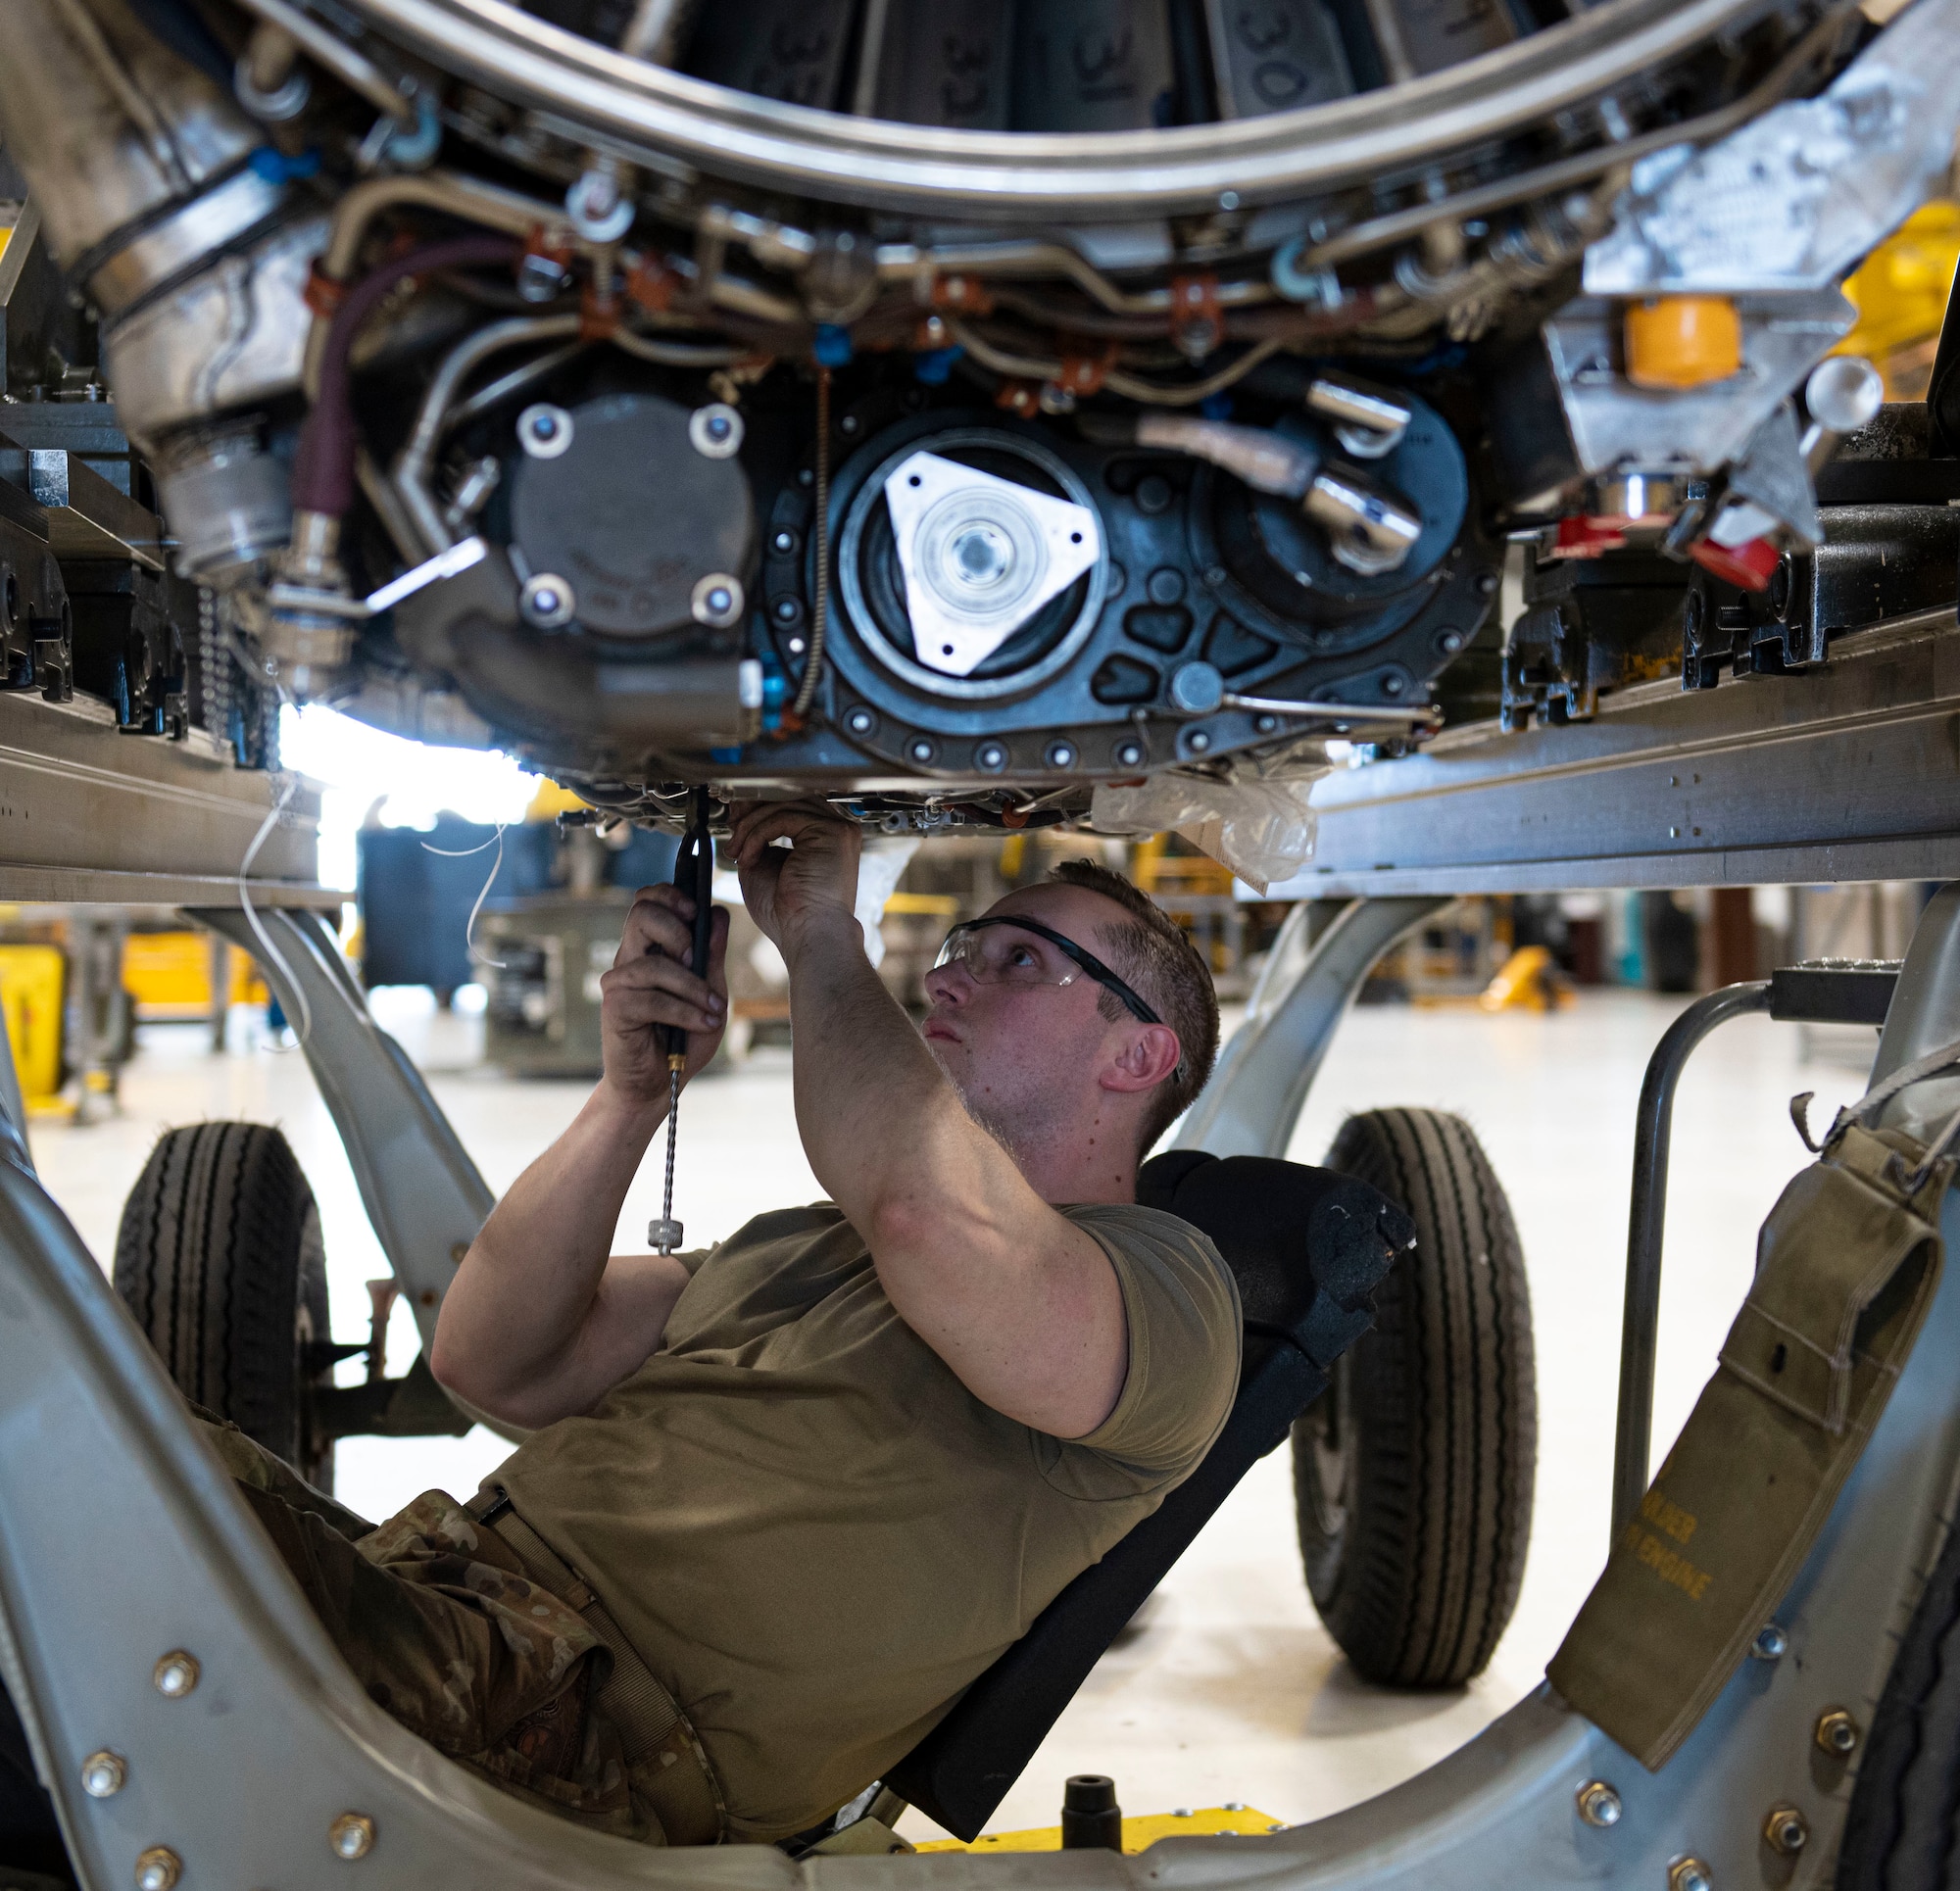 Airman 1st Class Jordan Newberry, 4th Component Maintenance Squadron aerospace propulsion apprentice, maintains the engine of an F-15E Strike Eagle at Seymour Johnson Air Force Base, North Carolina, April 7, 2022. Aerospace propulsion Airmen diagnose engine problems within the fuel, oil, electrical and engine airflow systems to ensure all components of the engine are in operational conditions. (U.S. Air Force photo by Airman 1st Class Sabrina Fuller)